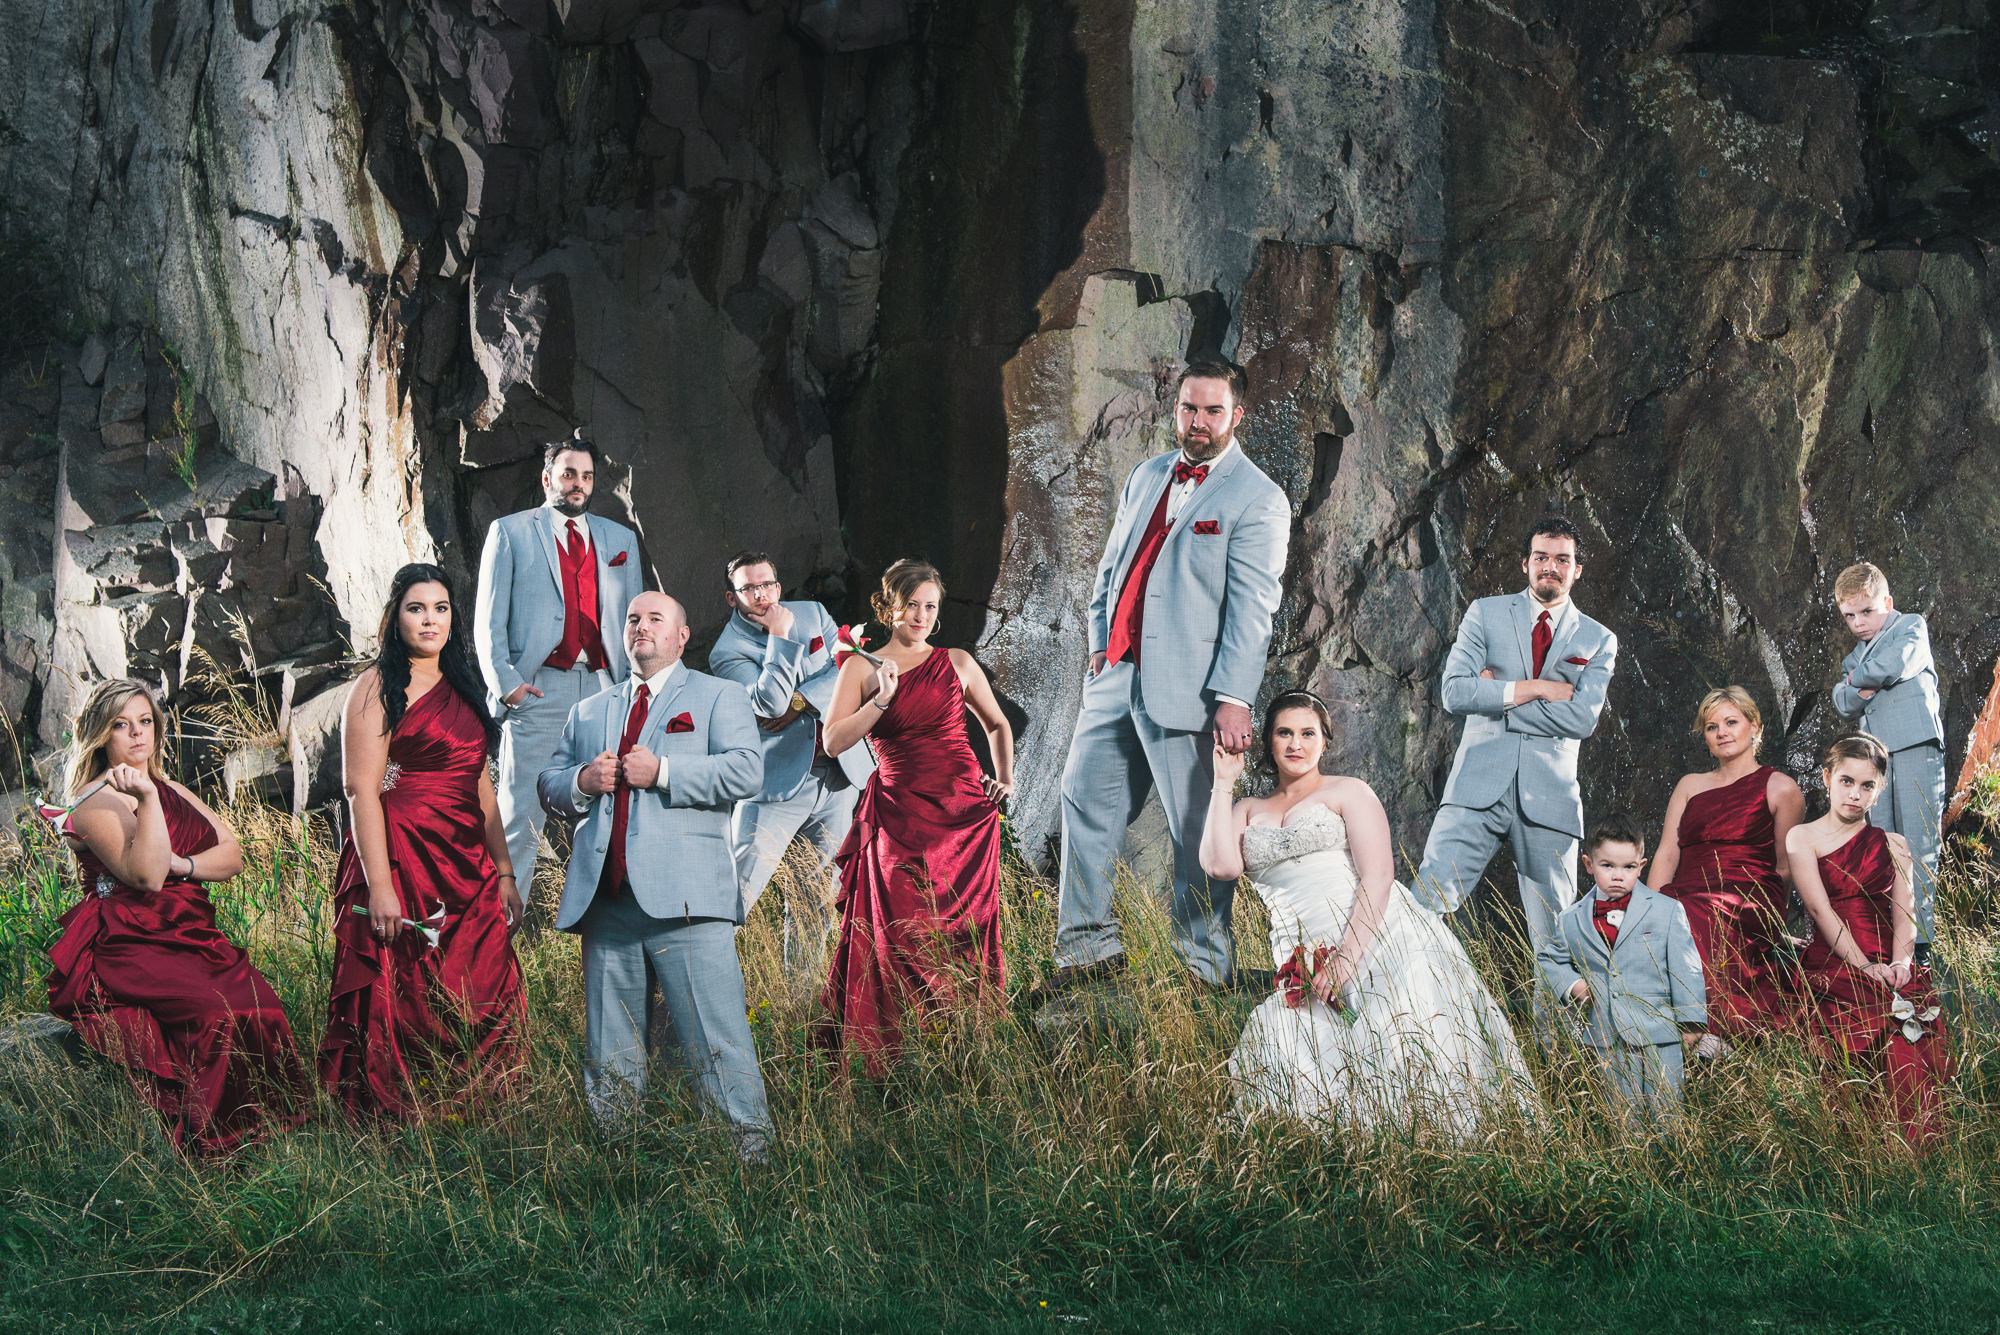 A stunning photograph shows the entire bridal party posing like celebrities in front of a natural cliff